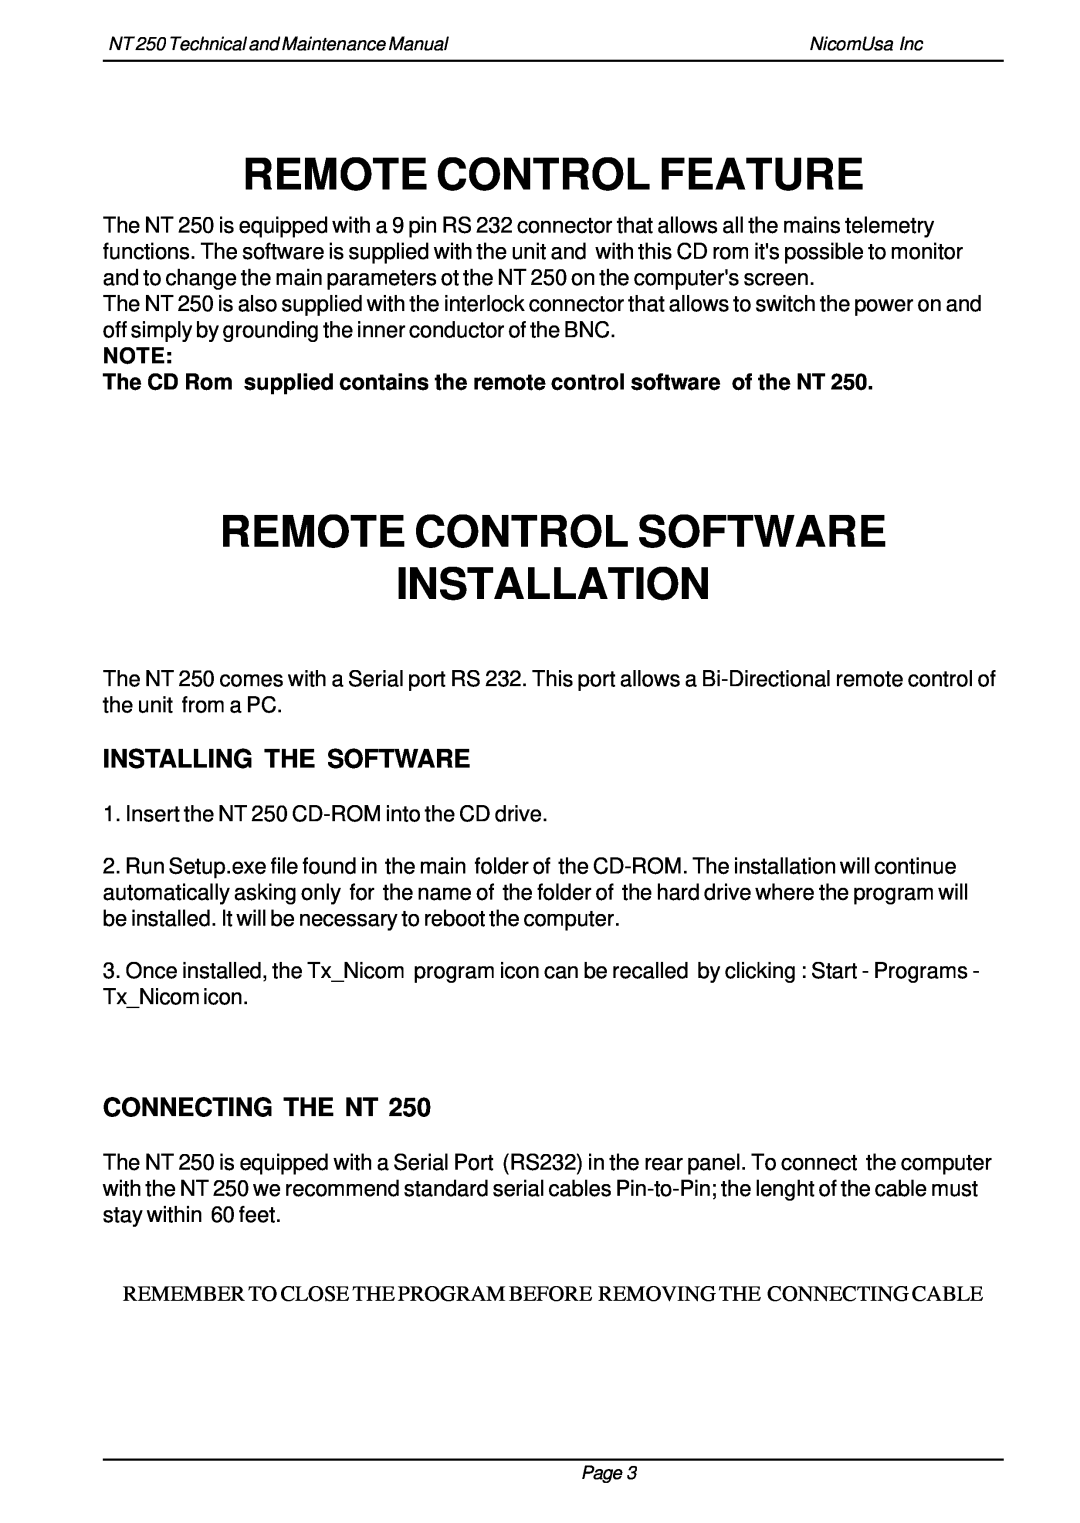 Genius NT 250 Remote Control Feature, Remote Control Software Installation, Installing The Software, Connecting The Nt 